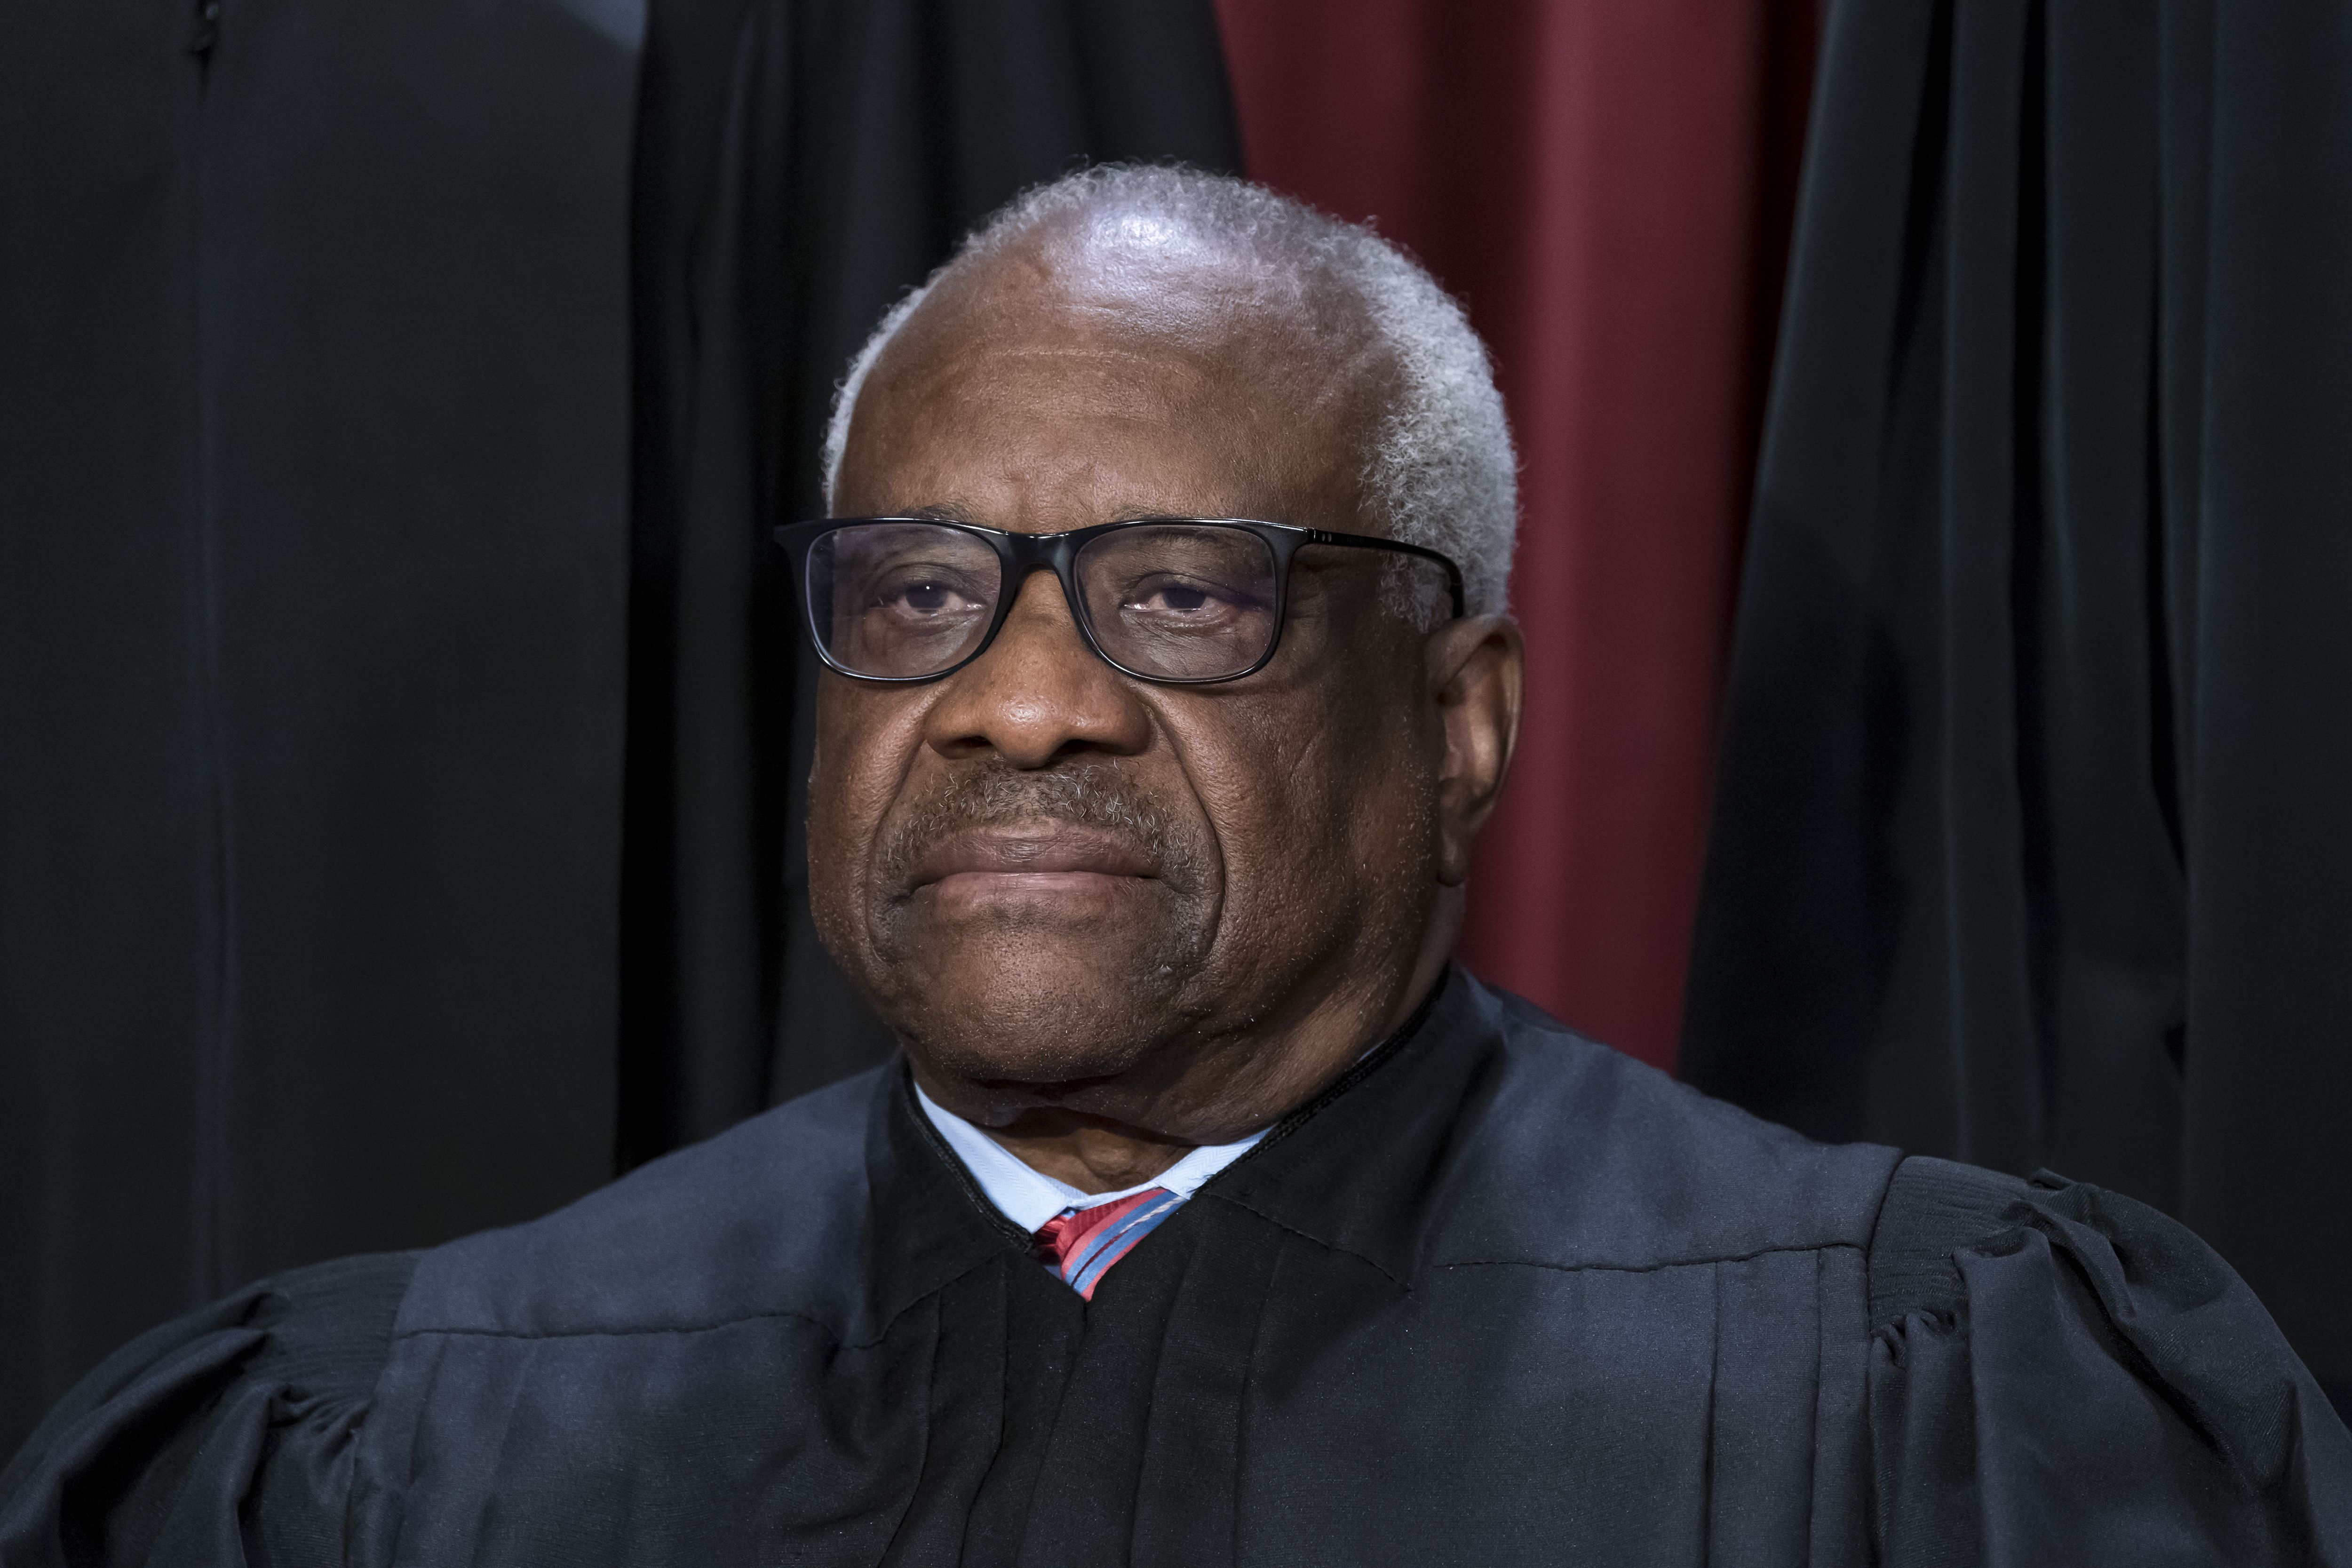 Justice Thomas complained about salary to GOP